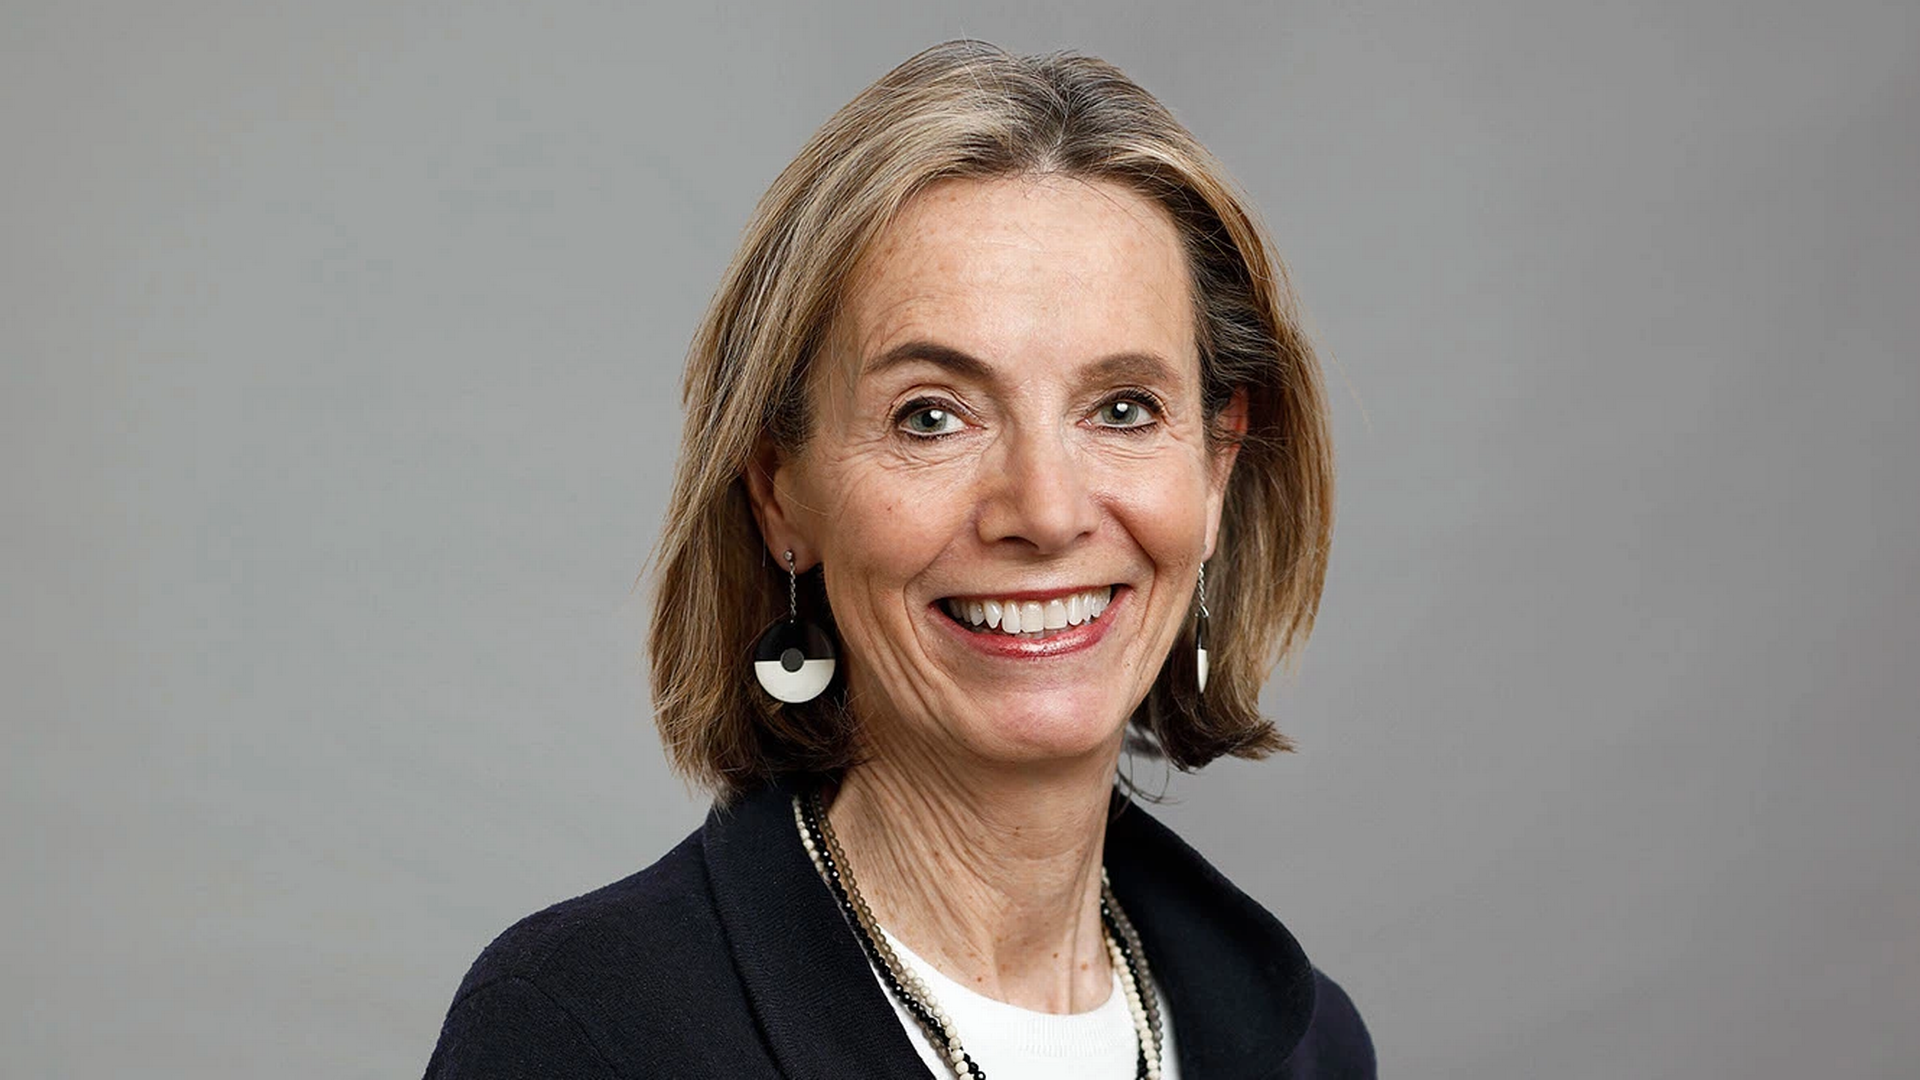 Chairwoman Grace Reksten Skaugen is one of three independent members on the Euronav board. The remaining four seats are divided equally between leading shareholders CMB and Famatown. | Photo: Investor AB